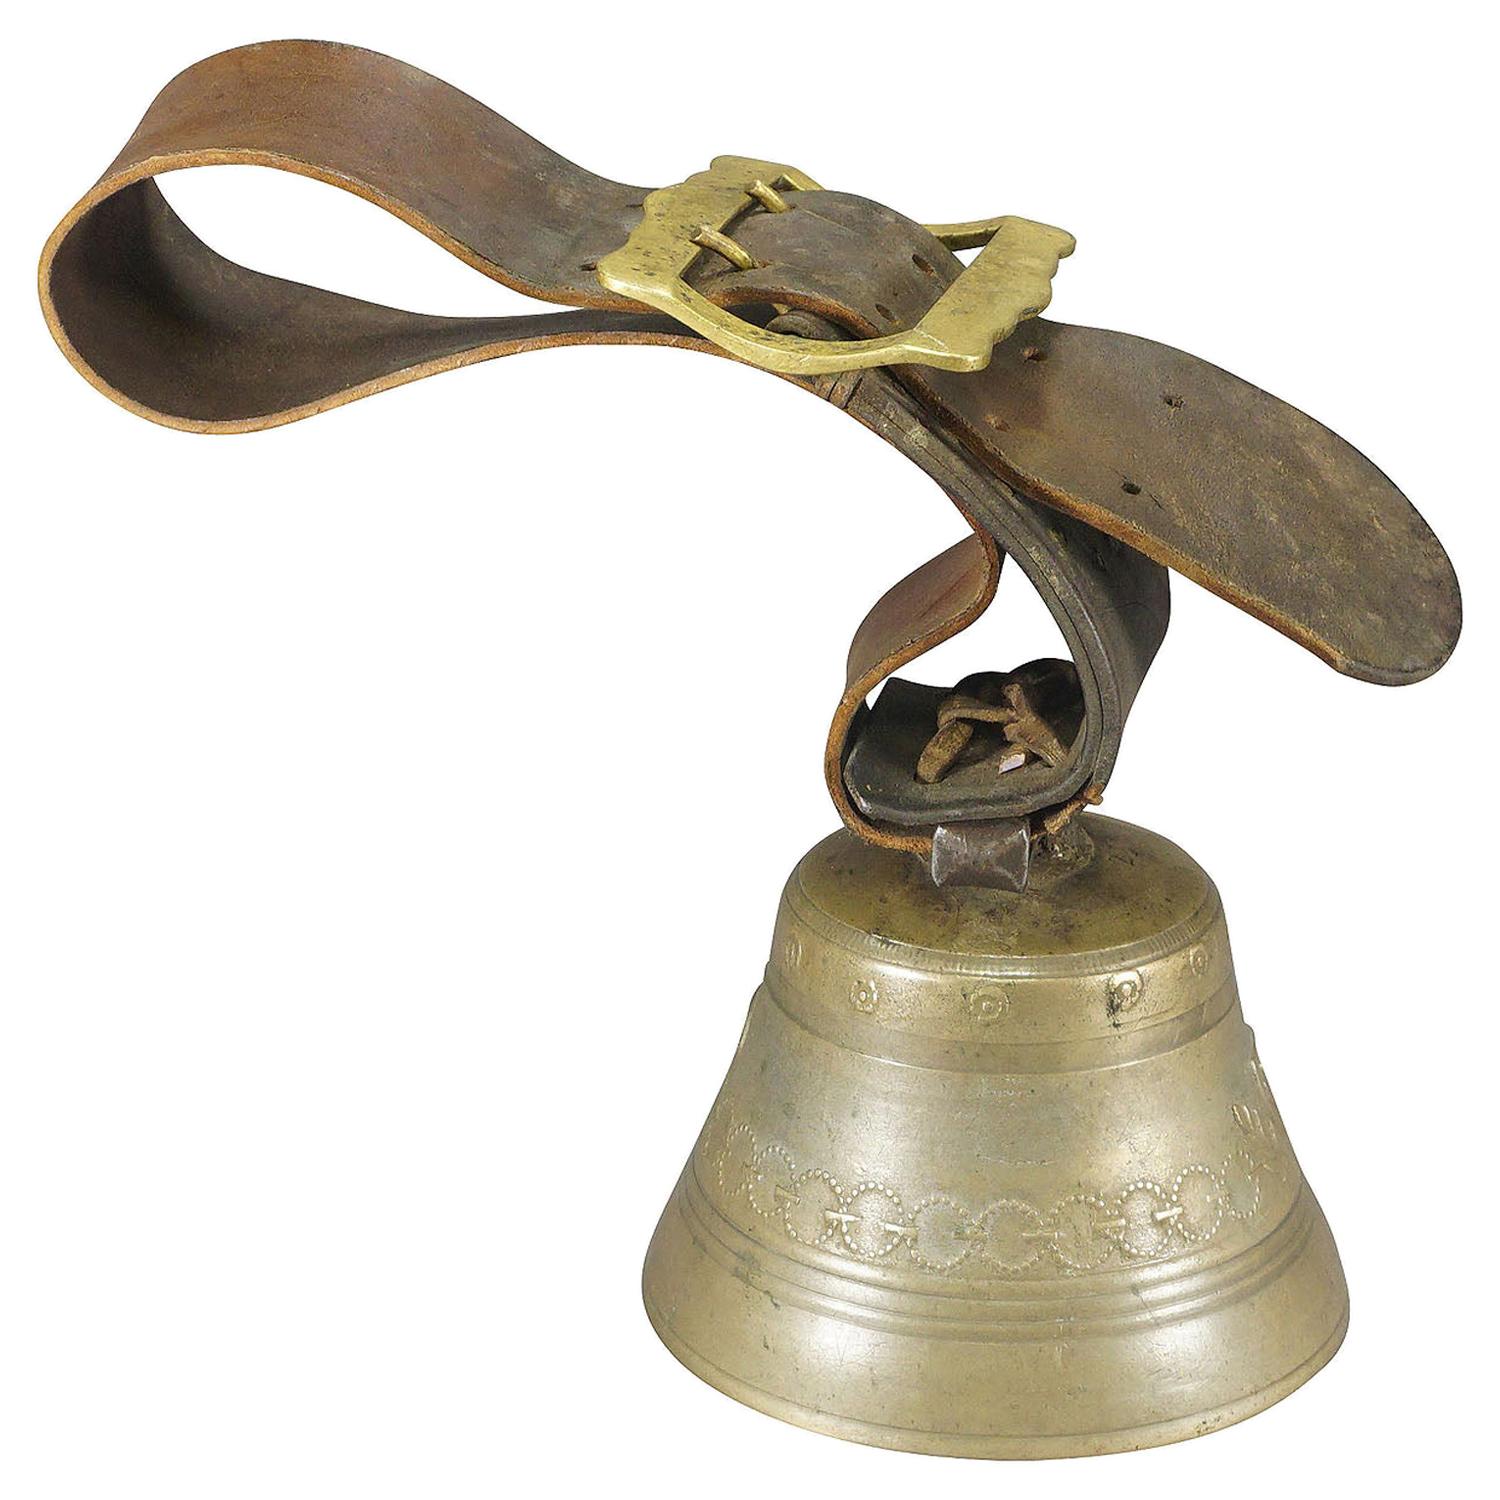 Antique Casted Bronze Cow Bell with Leather Strap, Switzerland, ca. 1900